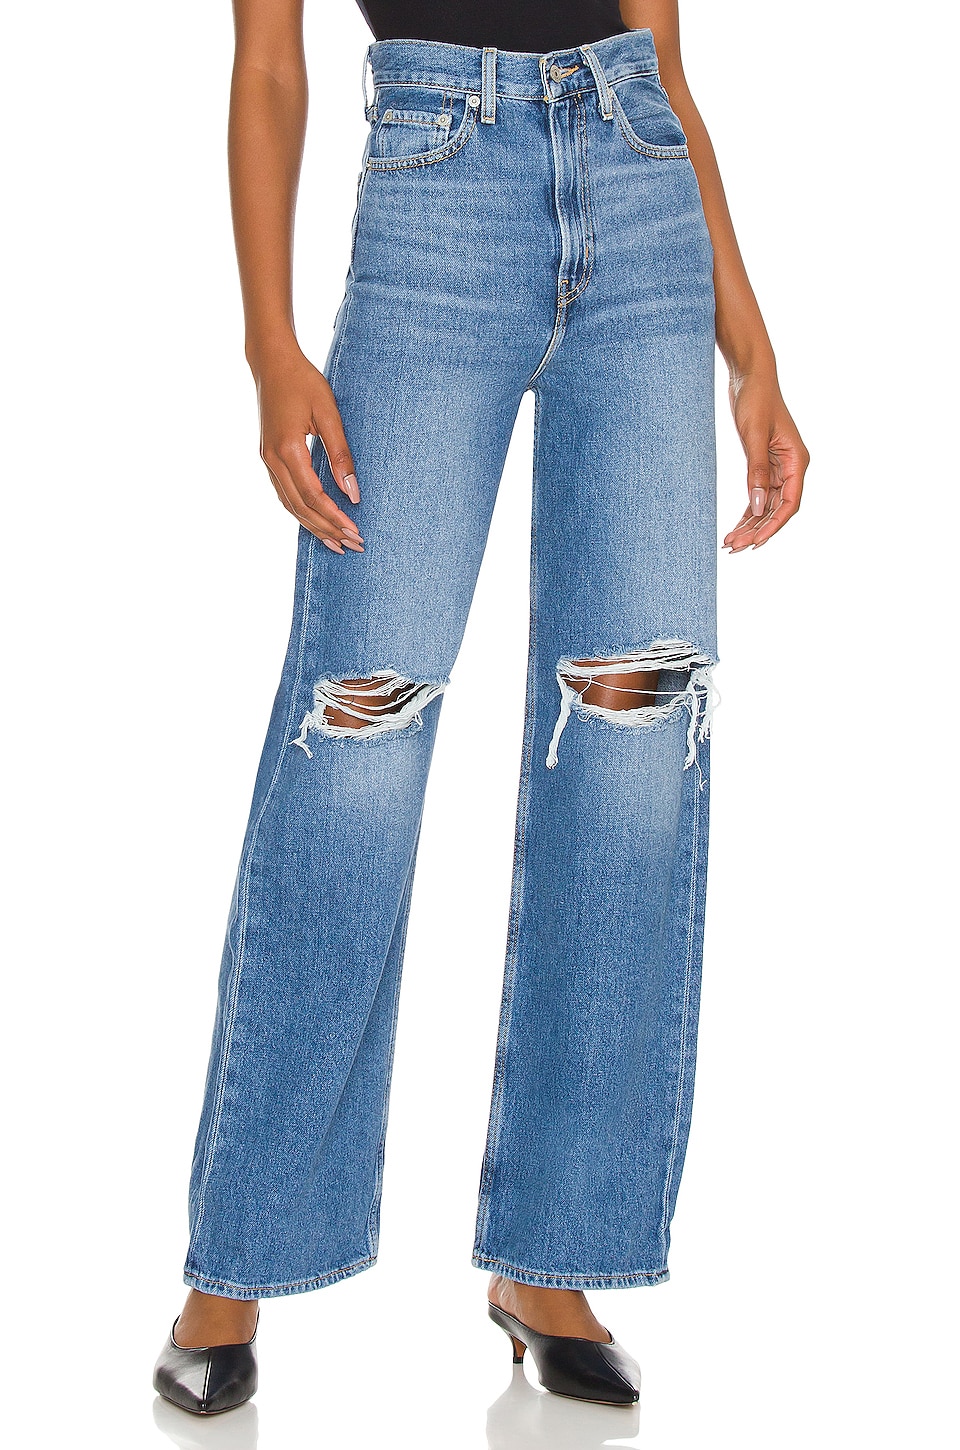 LEVI'S High Rise Loose Jean in Max Out | REVOLVE